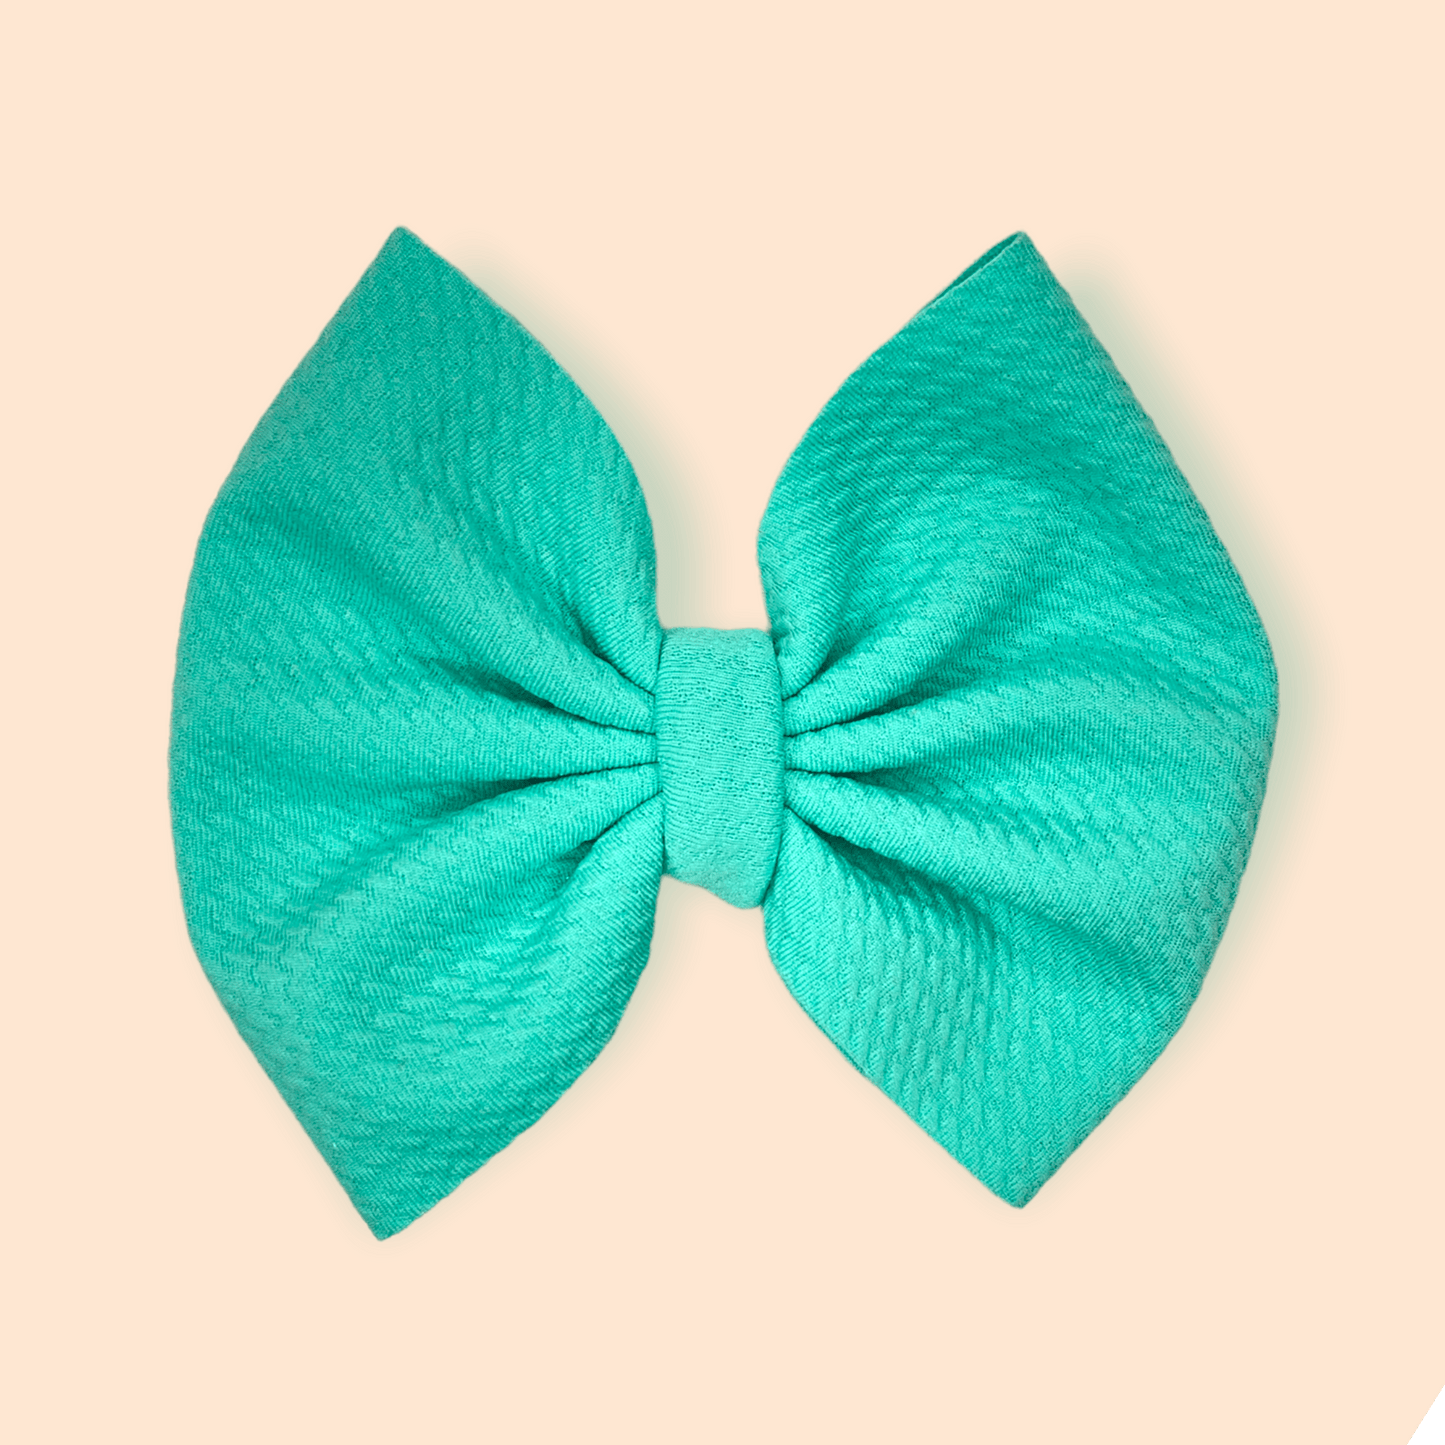 {{solid color Bow}} - {{Ryyourbow }}